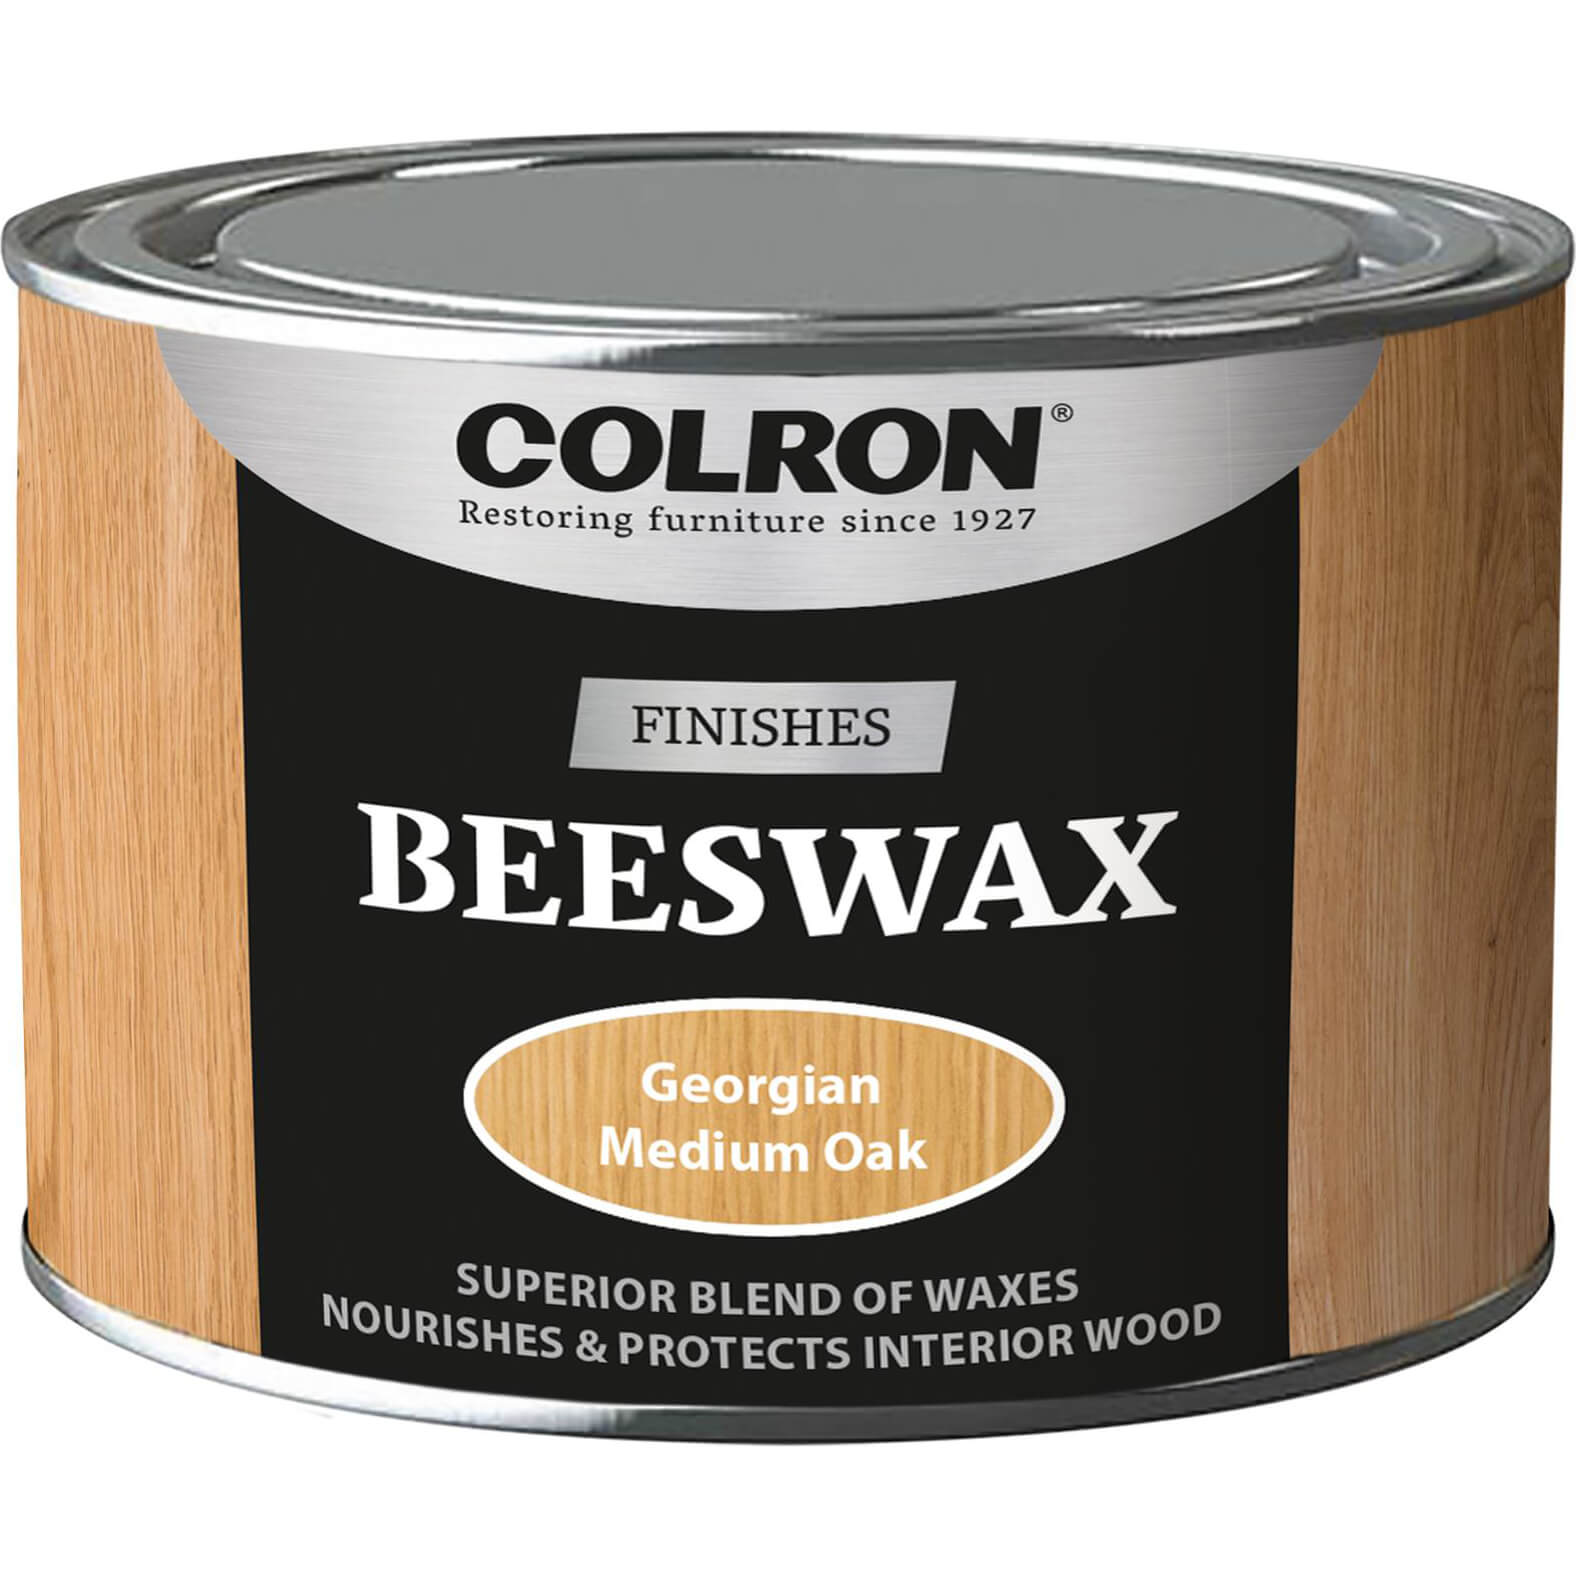 Image of Ronseal Colron Refined Beeswax Paste Medium Oak 400g